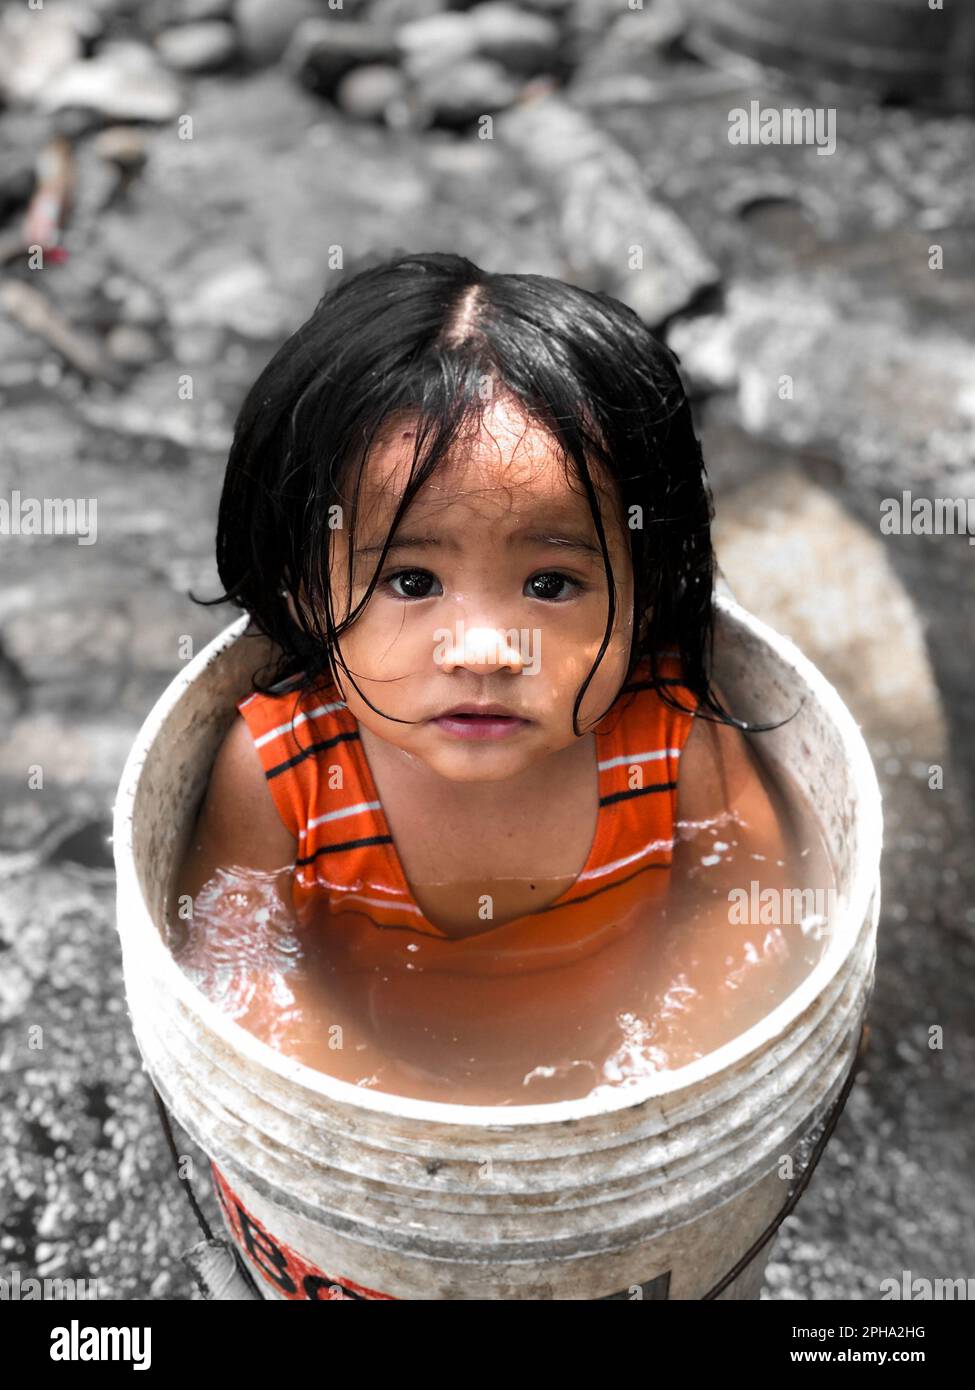 Baby bathing in a bucket of water Stock Photo